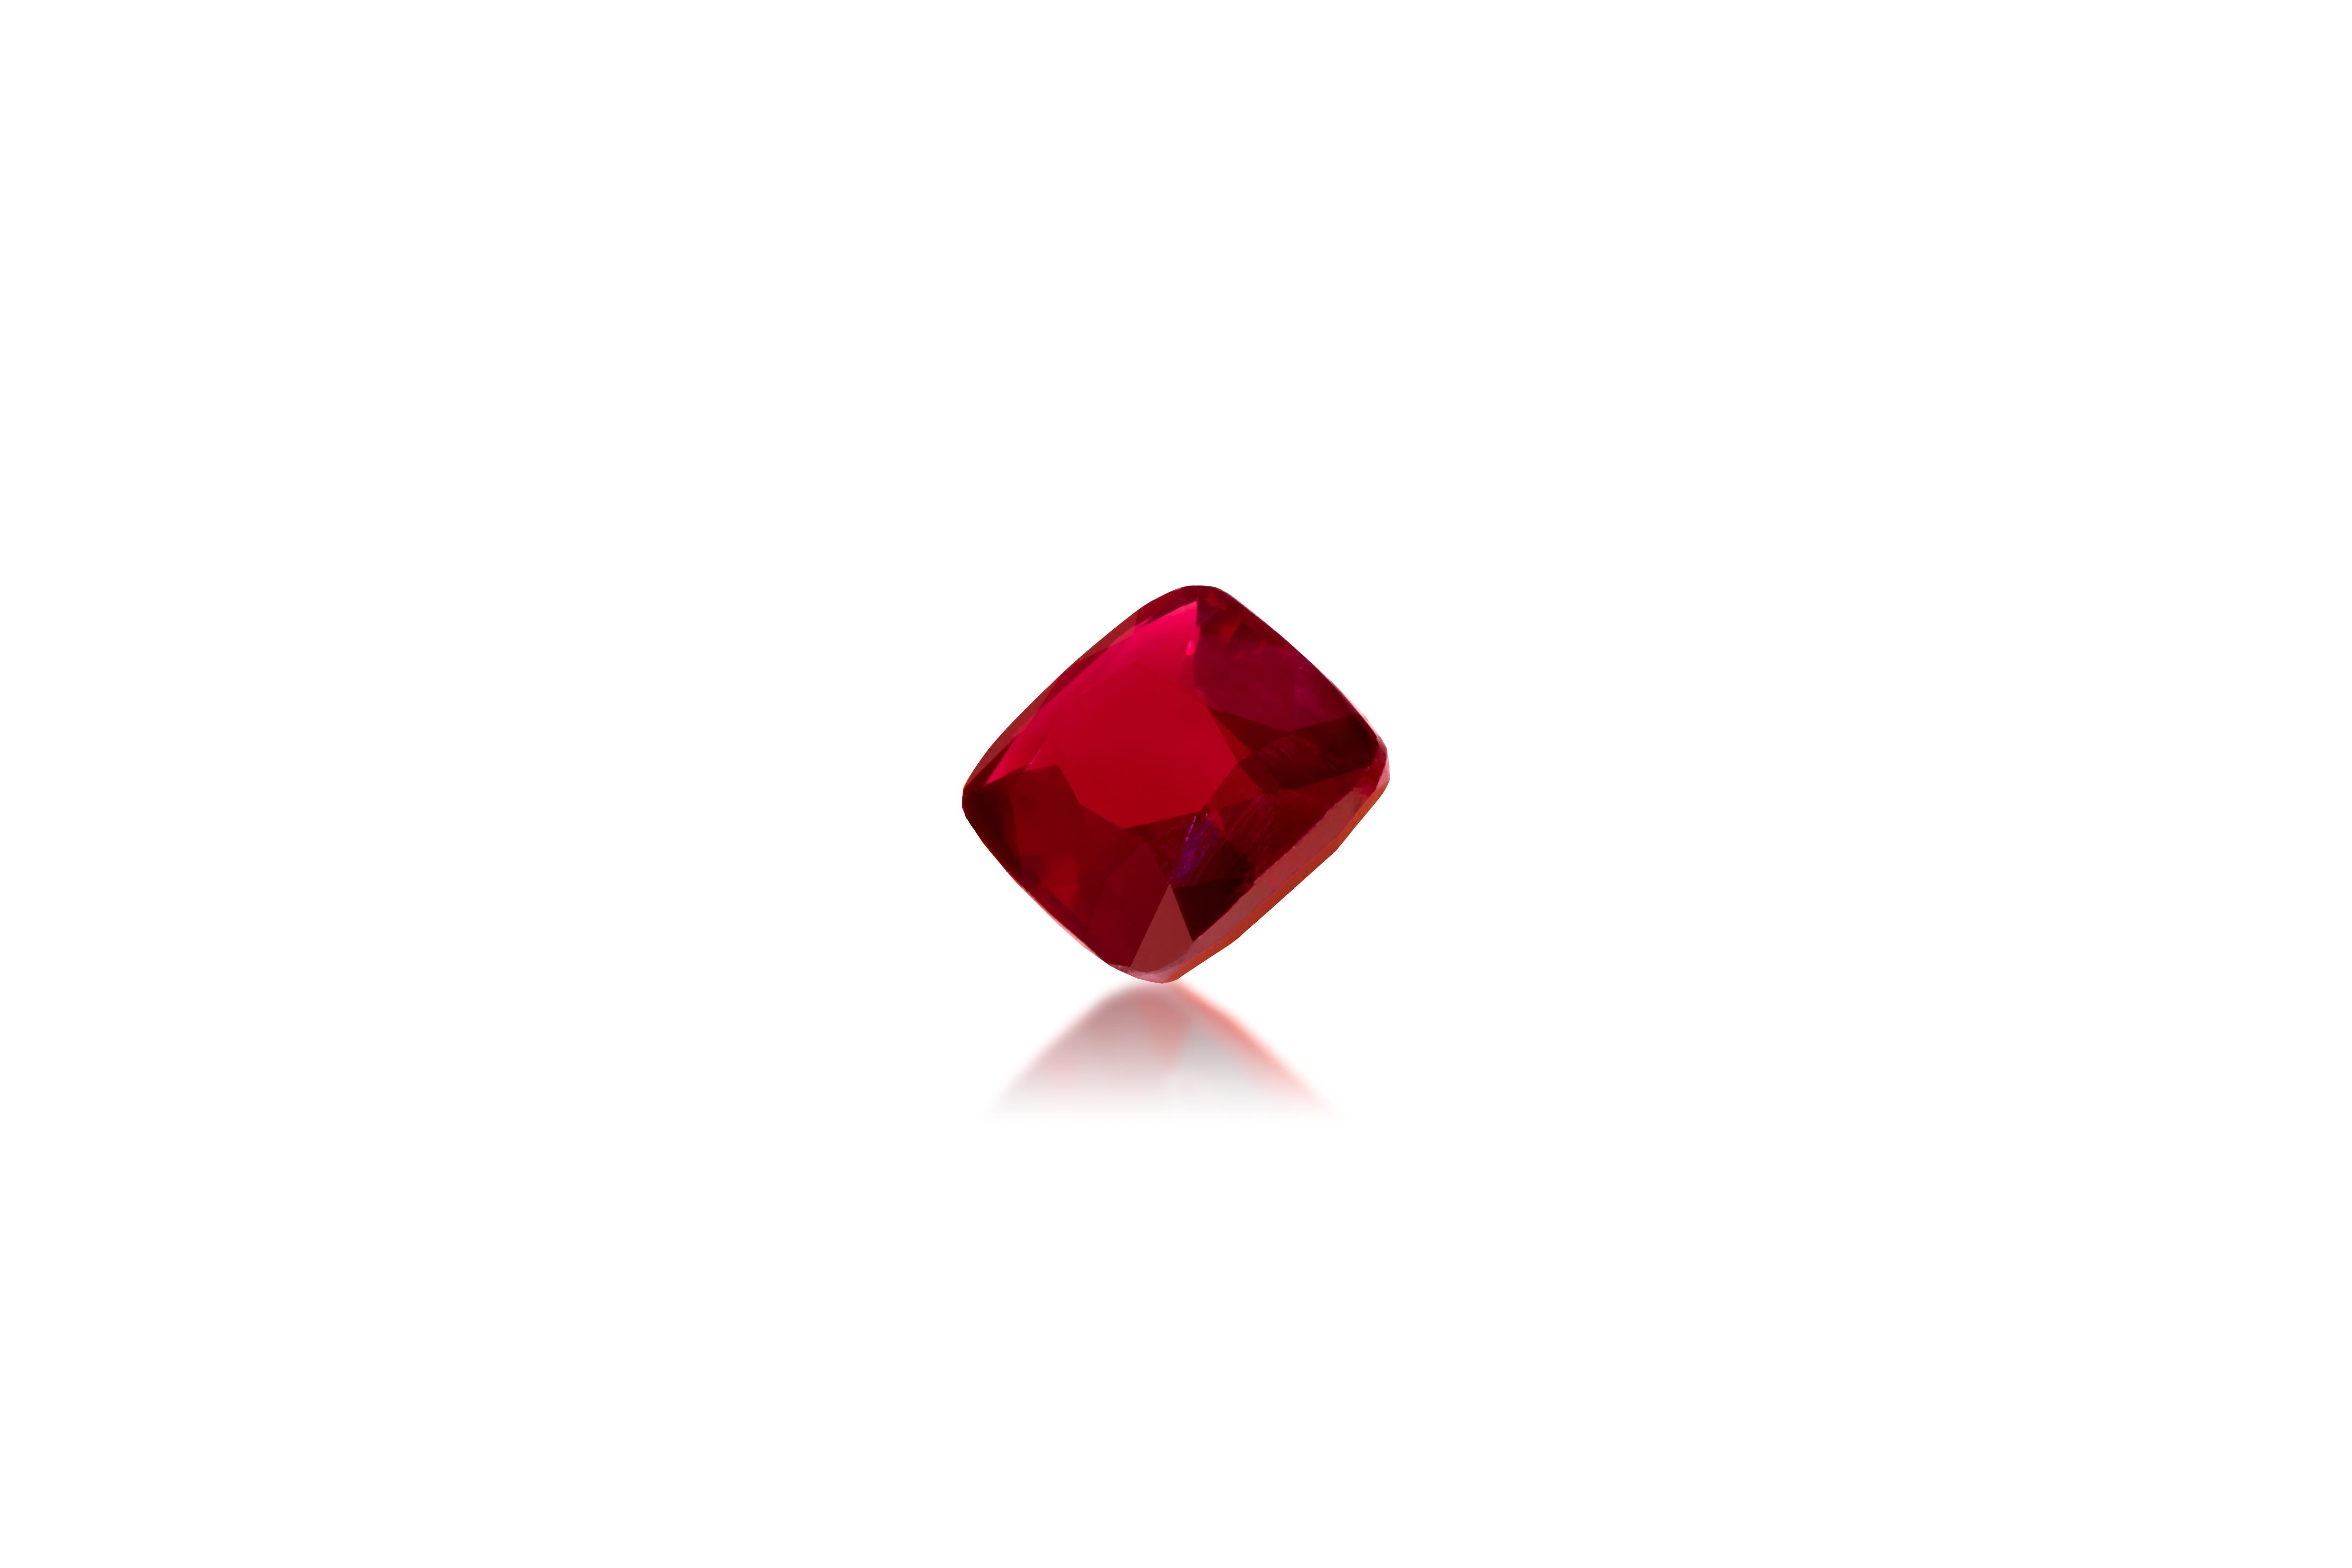 Sapphire: Vivid Red Ruby
Origin: Mozambique
Shape: Rectangular Cushion
Carat Weight: 2.05 cts
Dimensions: 8.21 x 7.03 x 3.38 mm

This beautiful Natural Vivid Red Ruby has a natural red color and is unheated.
It is clean and nicely faceted and